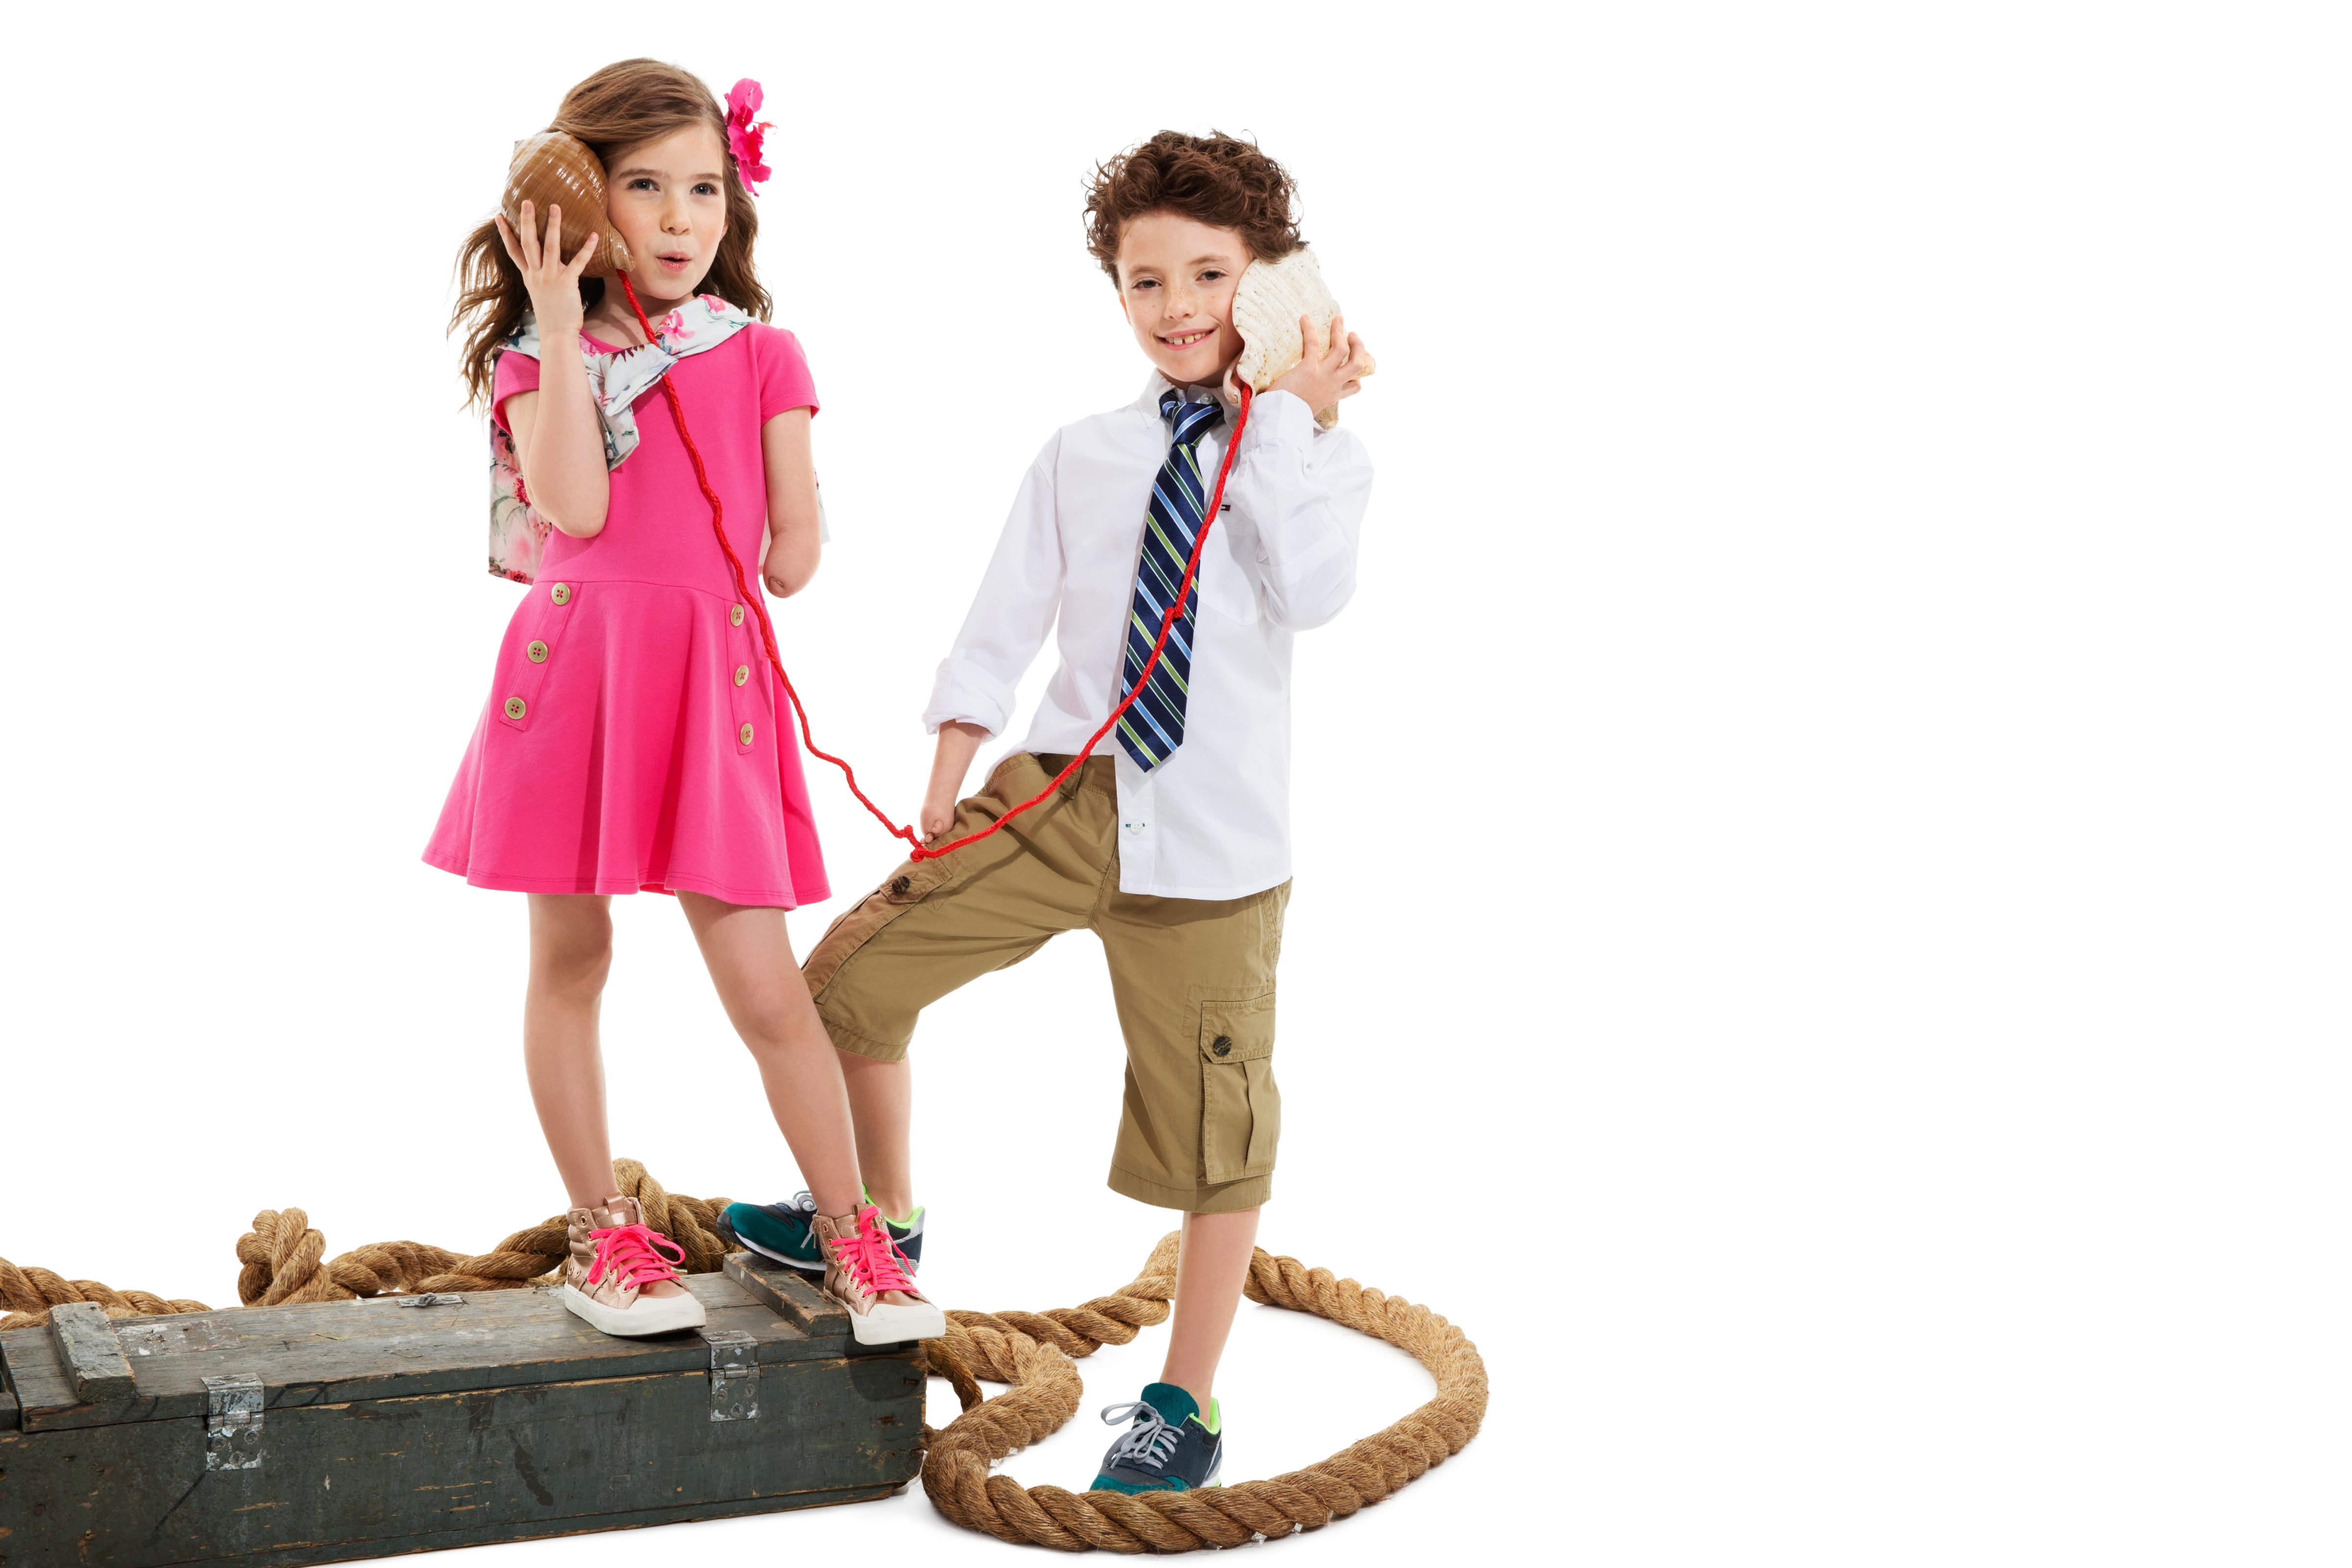 The Tommy Hilfiger adaptive clothing collection (Courtesy of Tommy Hilfiger)